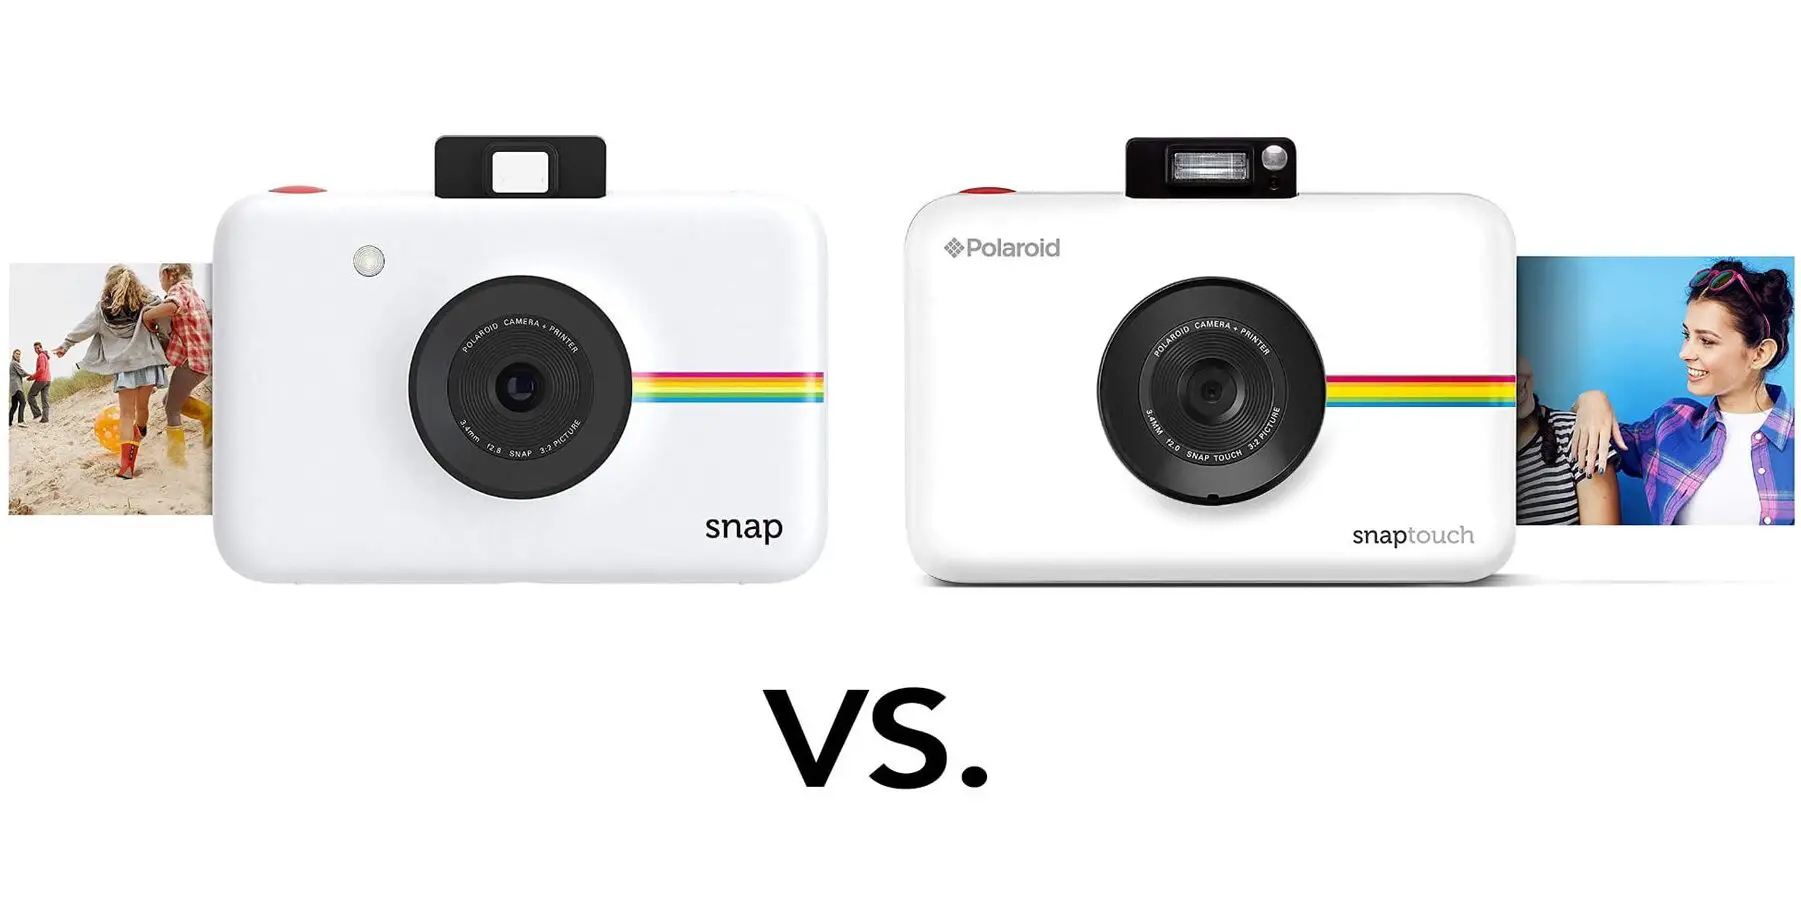 Snap vs. Snap Touch 2.0